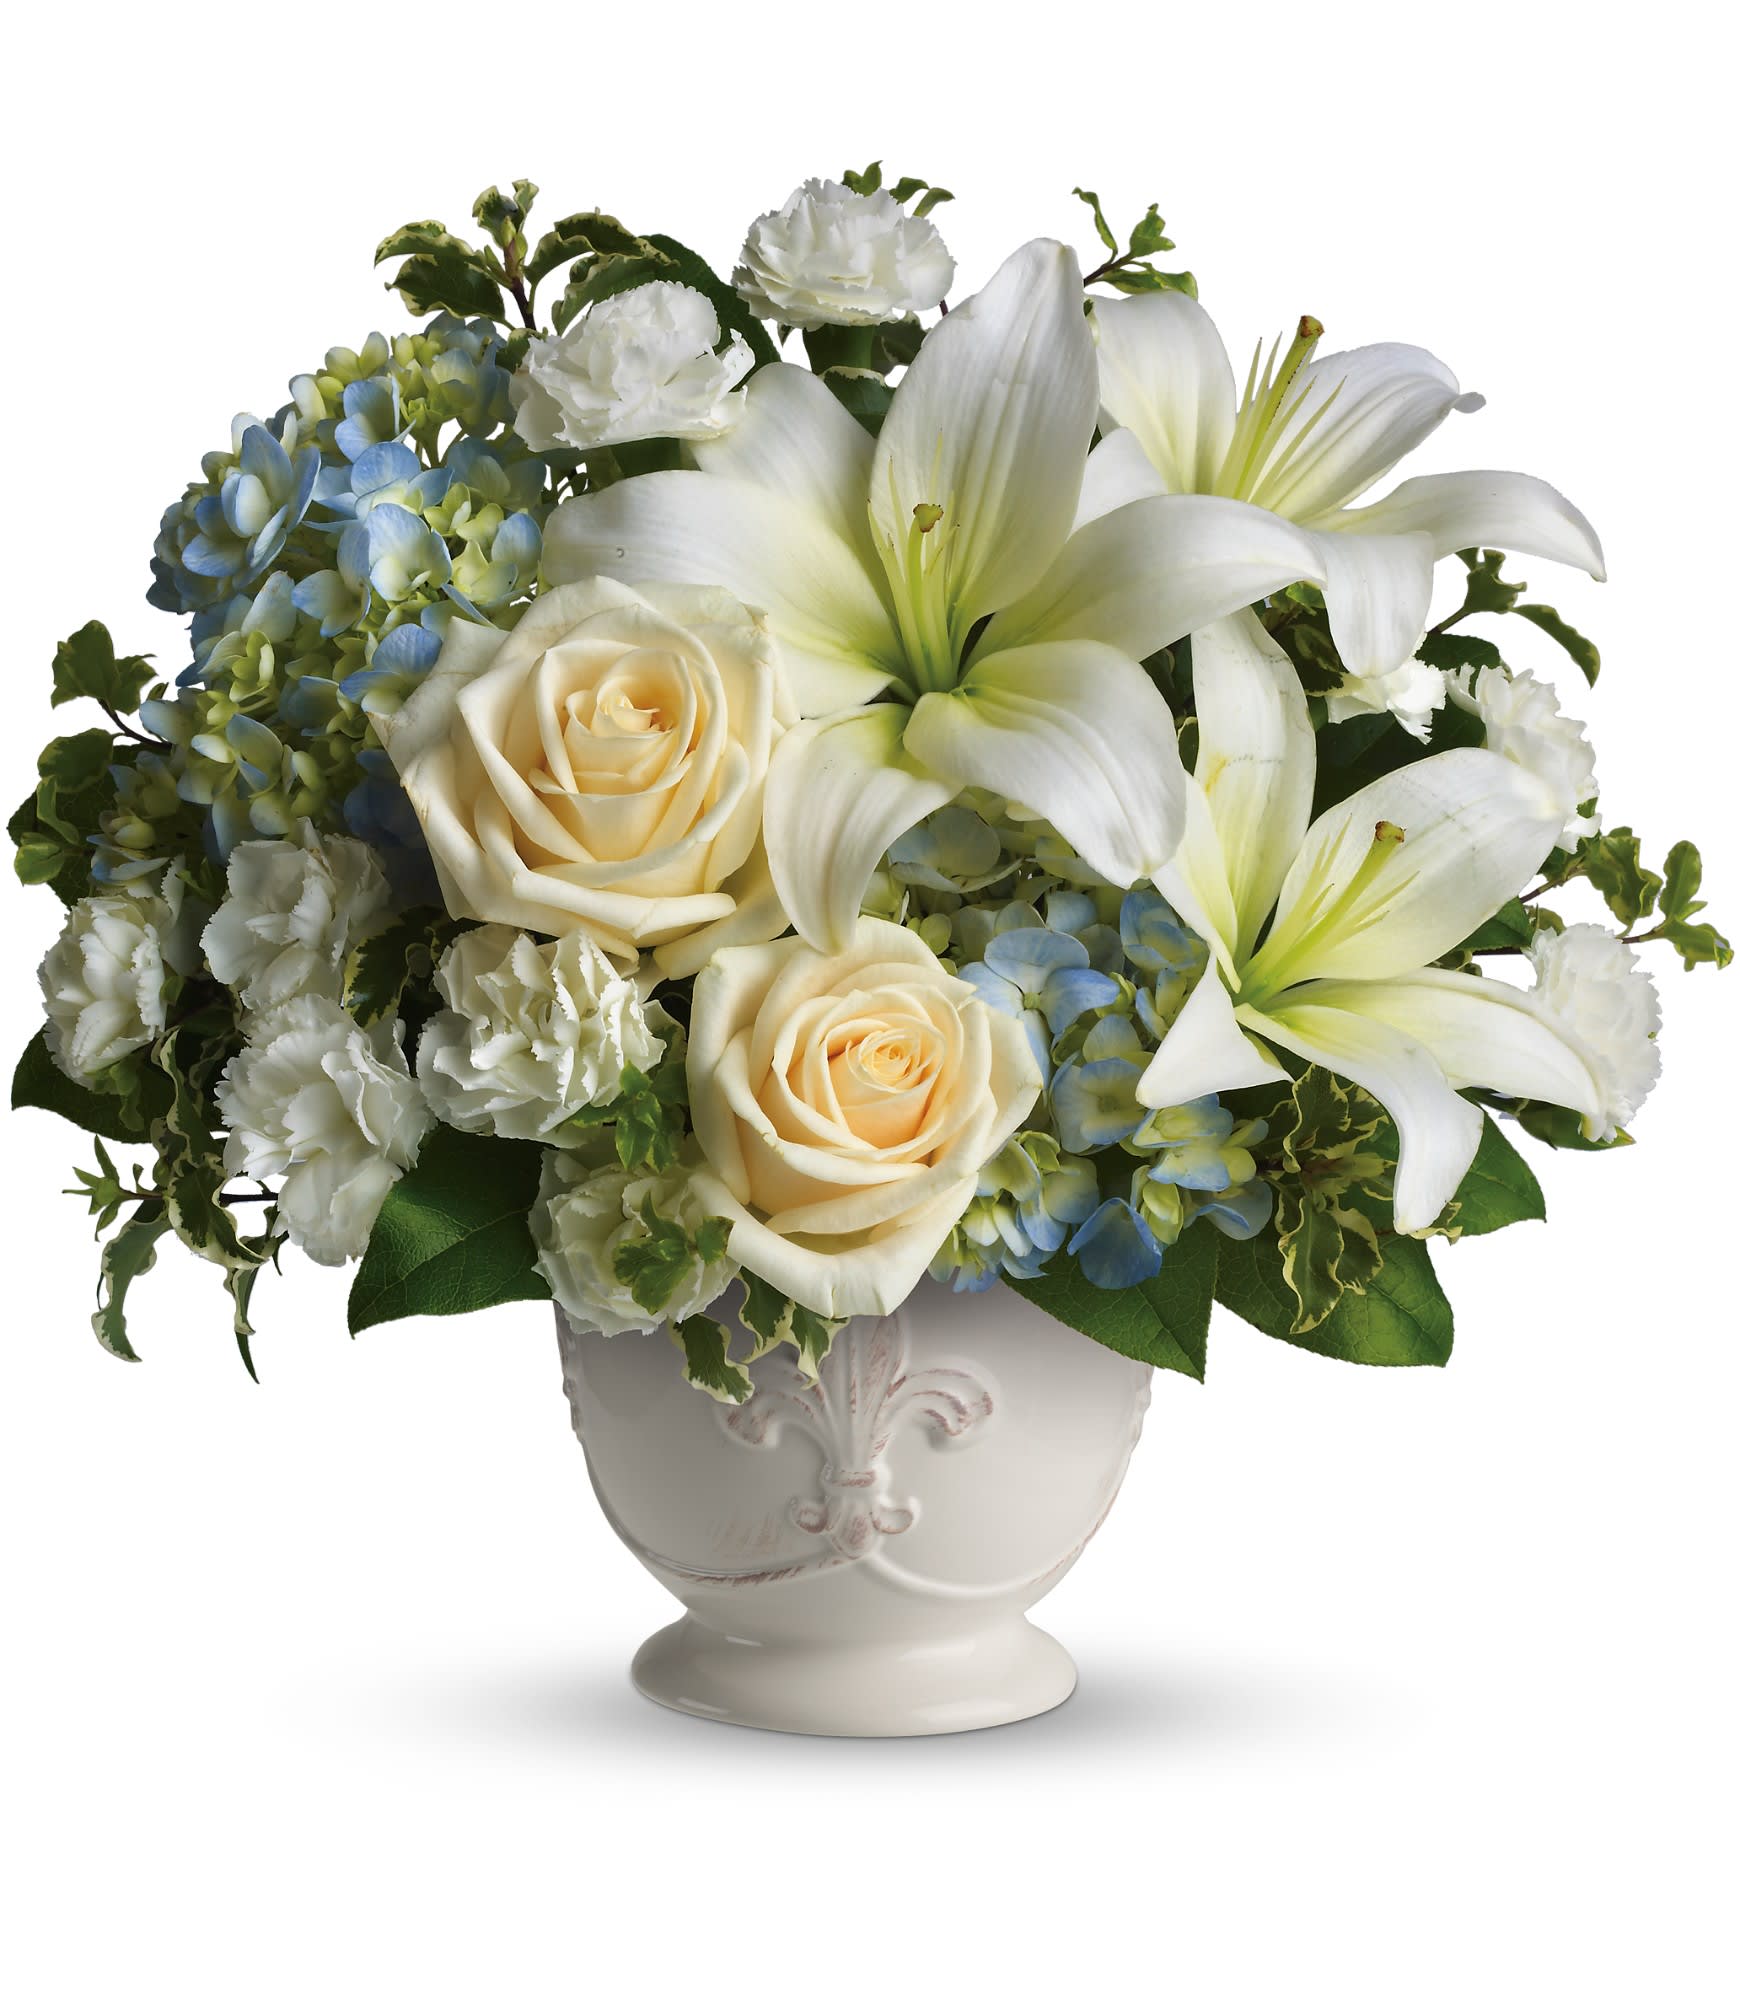 Beautiful Dreams  - Soothing and respectful. Calm and compassionate. This beautiful collection of white and light colored blossoms will deliver your loving thoughts perfectly. 